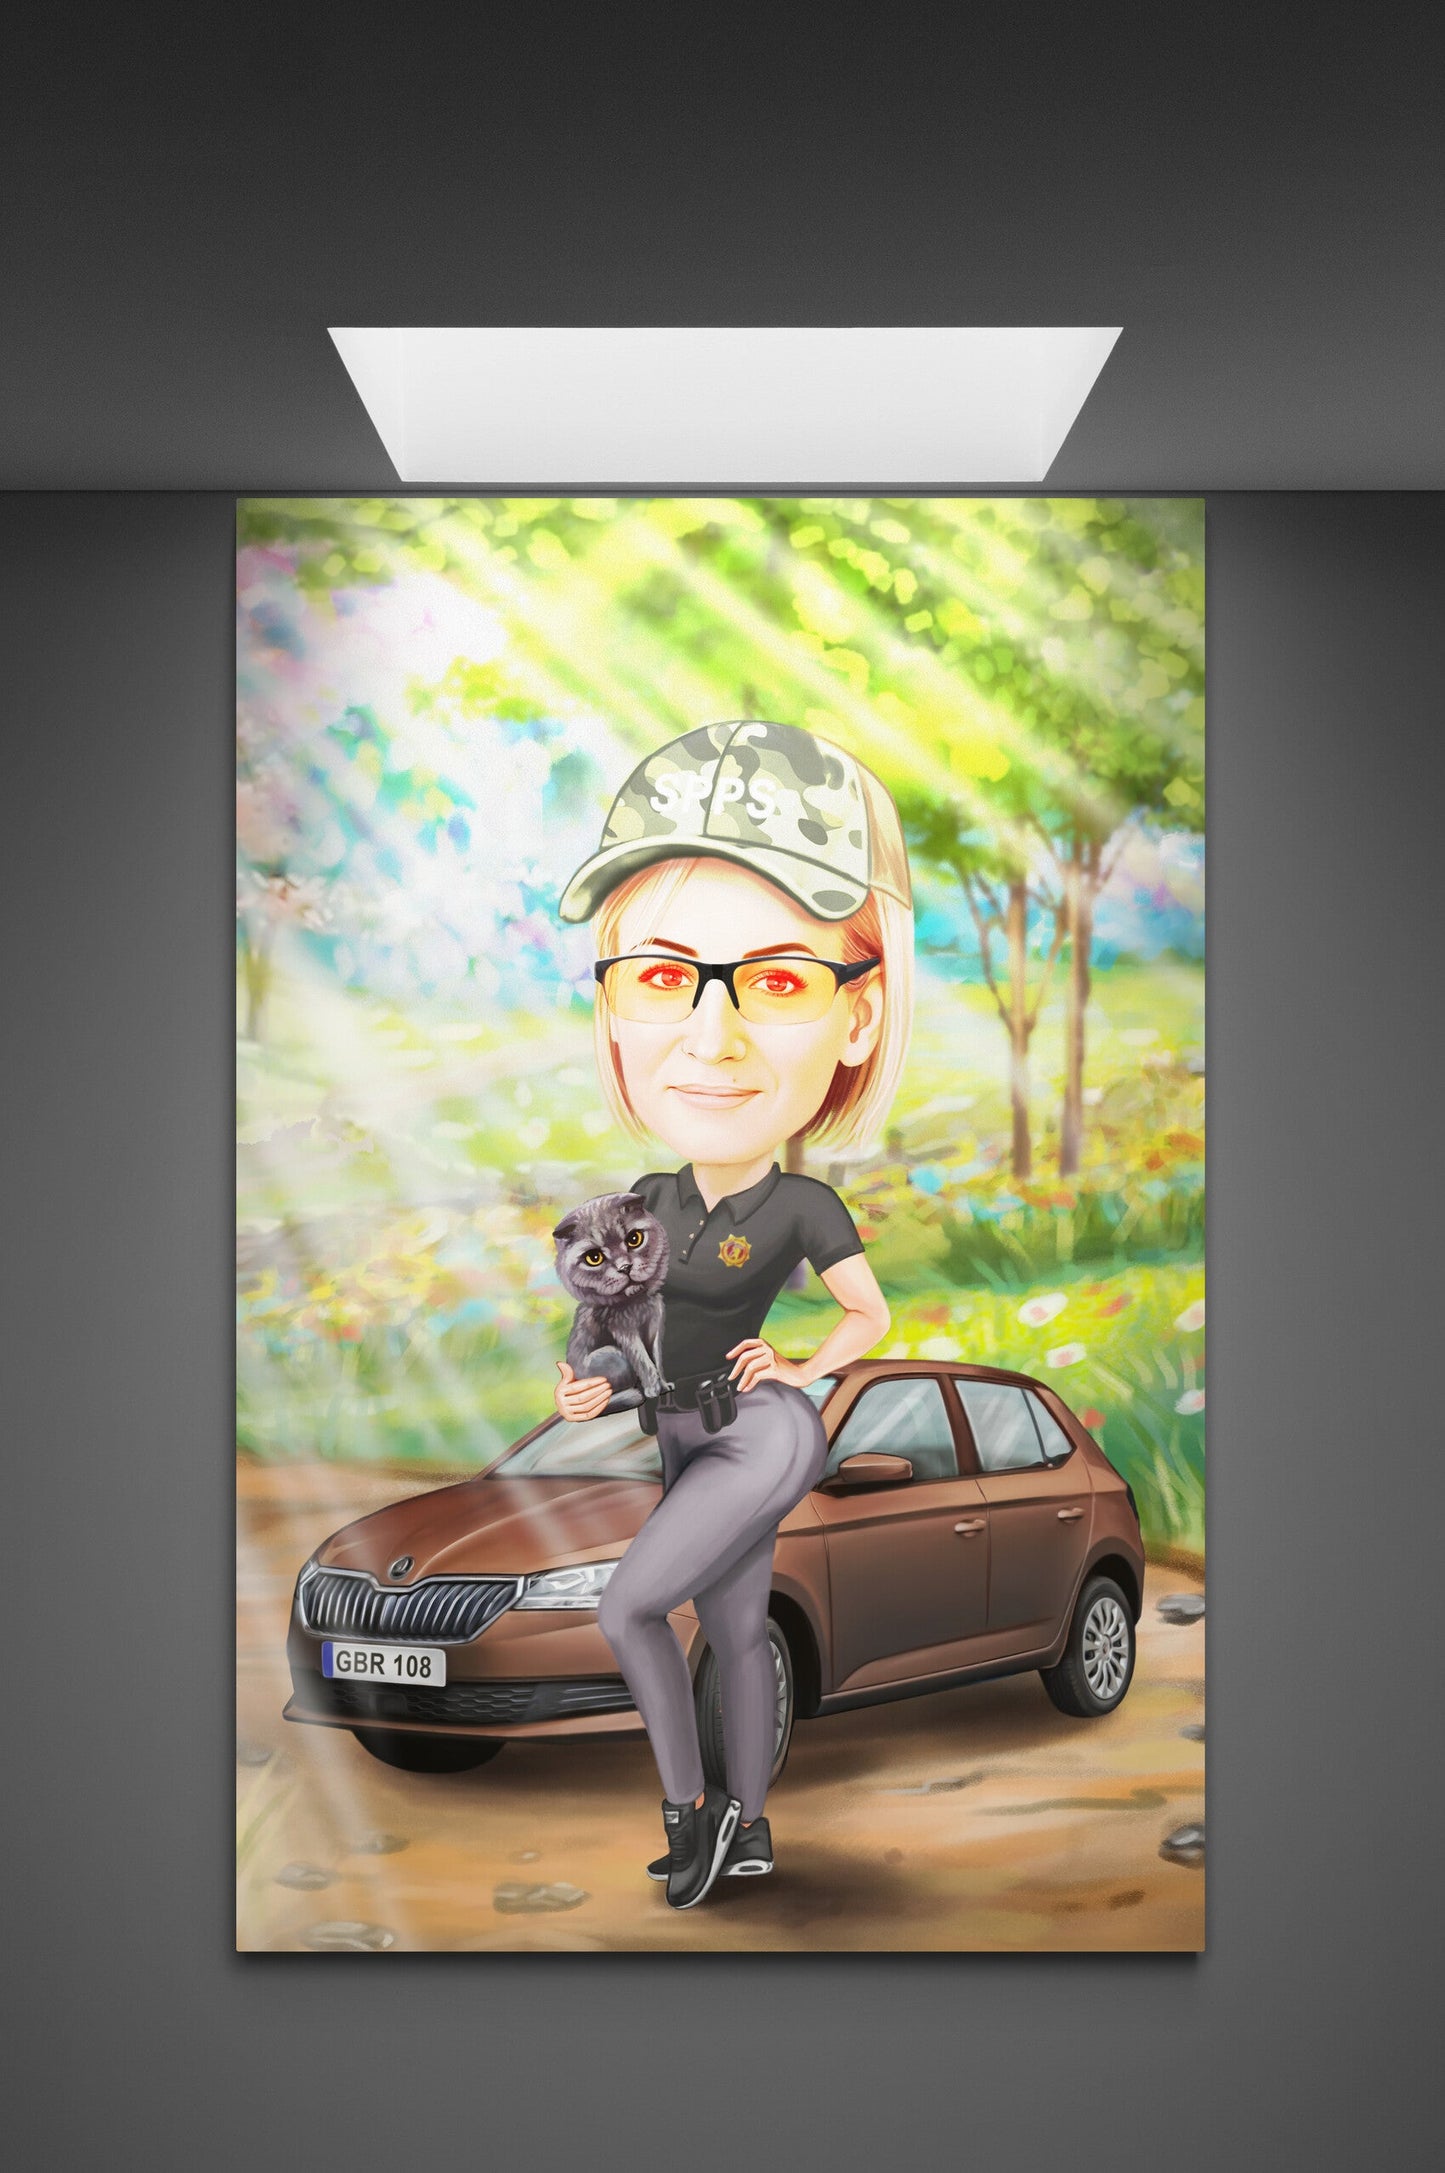 In nature with the car caricature